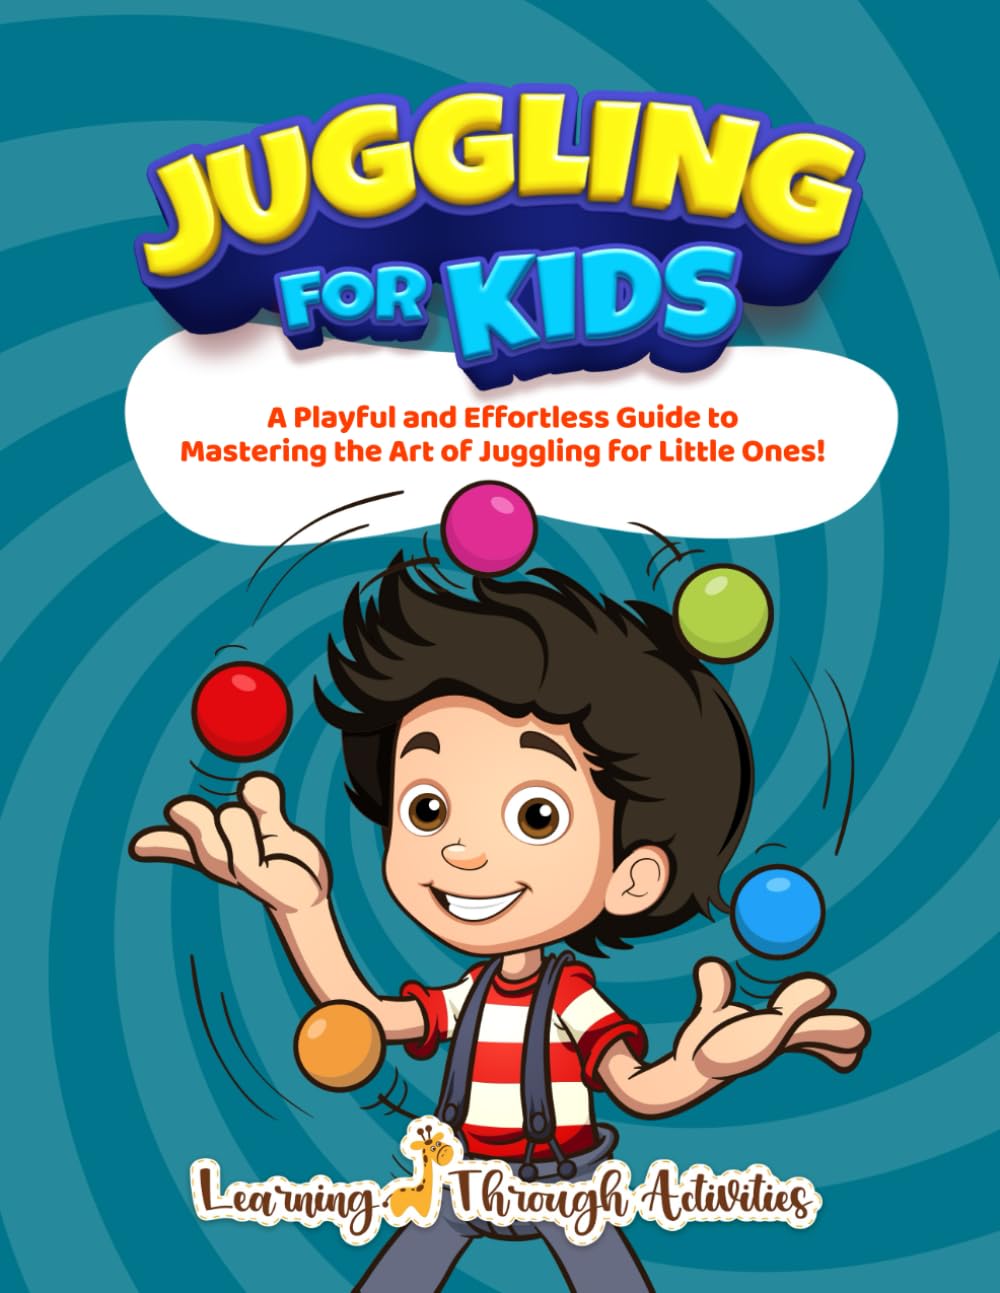 Juggling For Kids: A Playful and Effortless Guide to Mastering the Art of Juggling for Little Ones! (Fun Tricks)